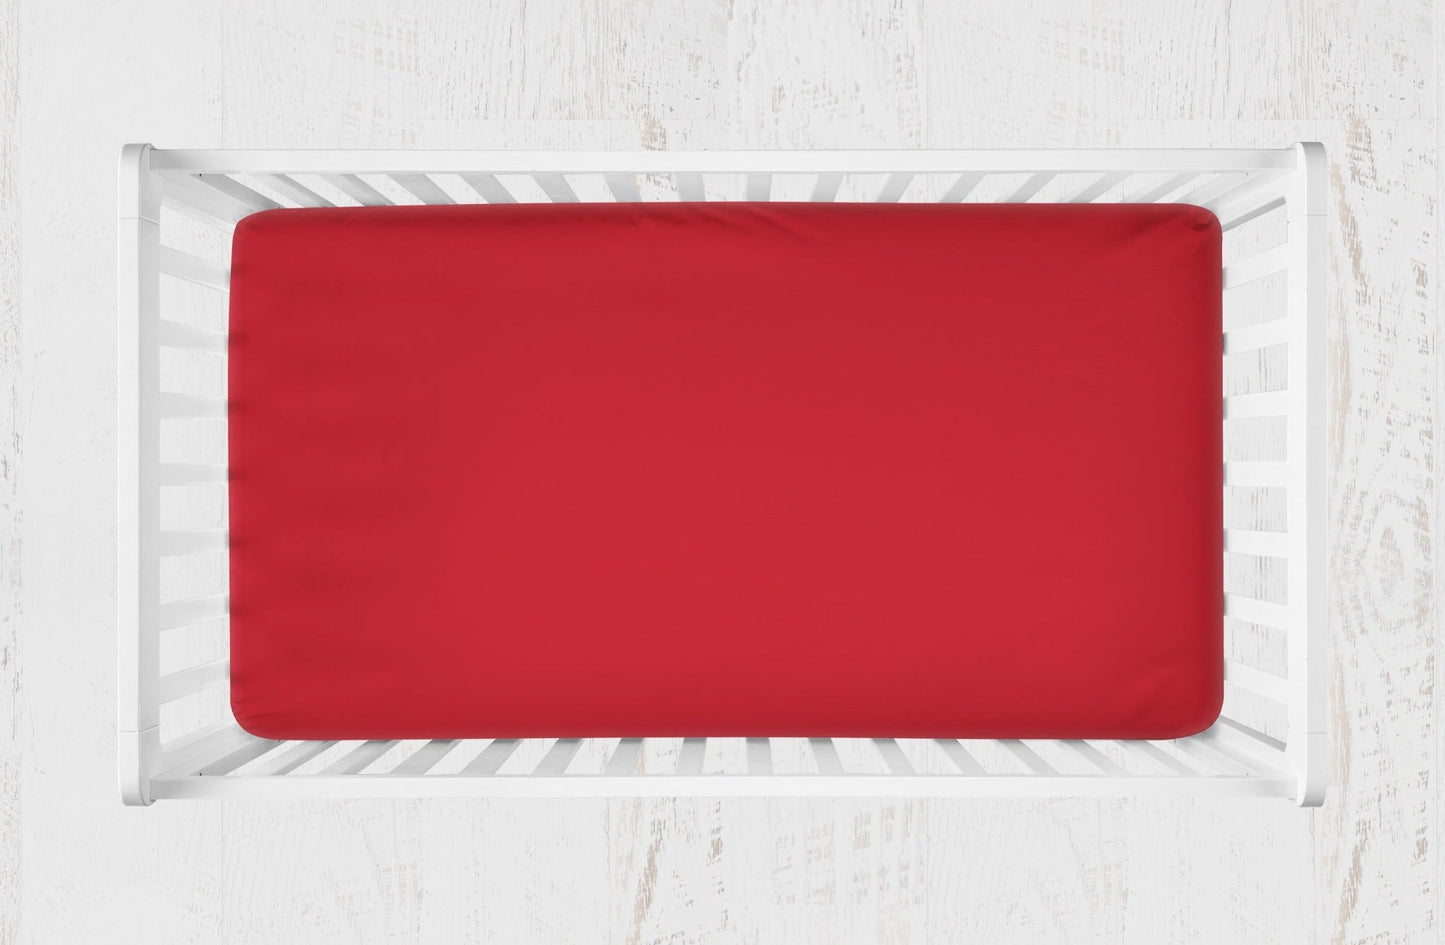 Red Crib Sheet, Red Changing Pad Cover, Boy Nursery Bedding - The Creative Raccoon